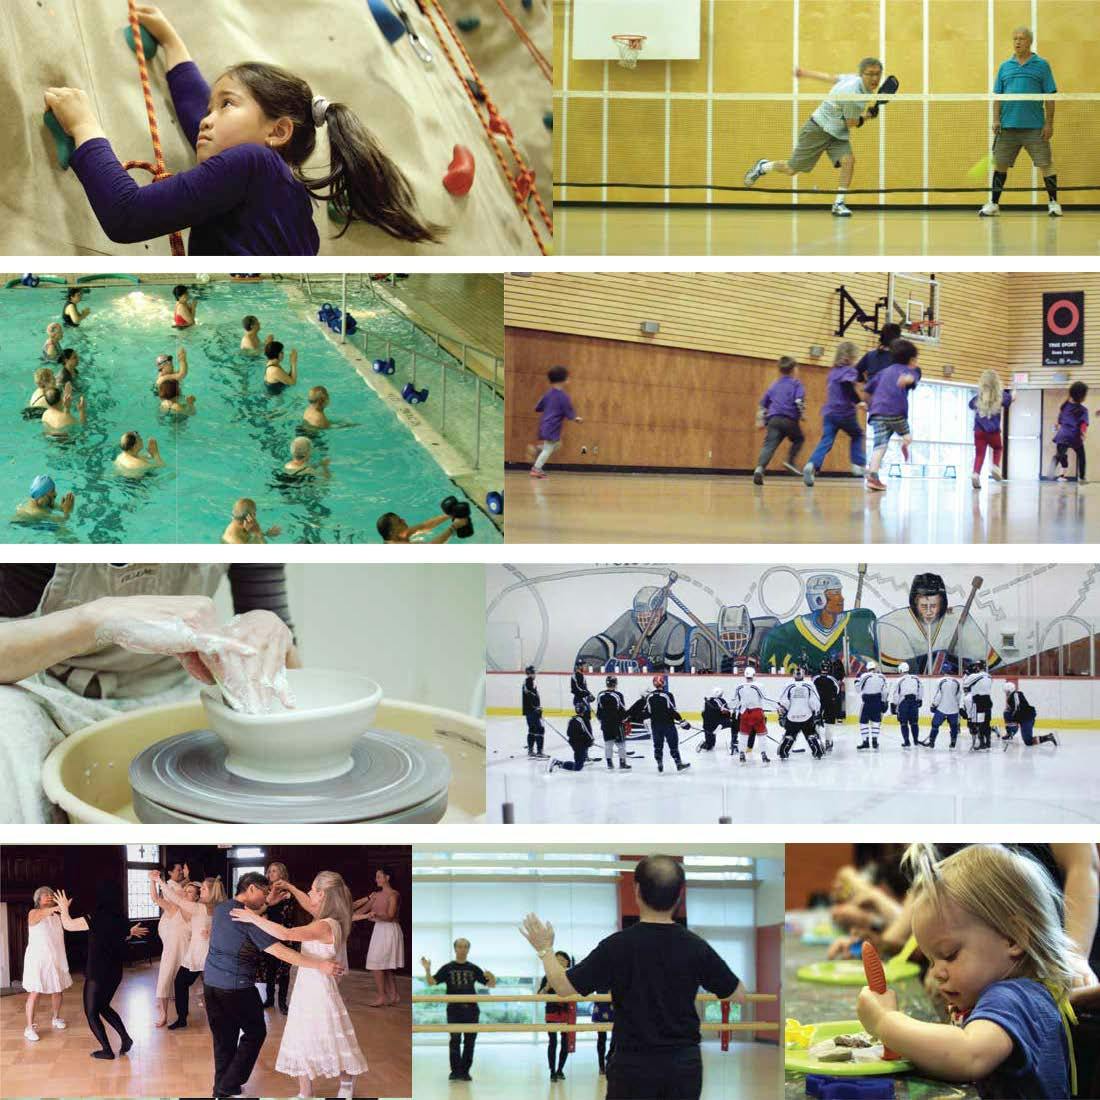 Collage of various community centre activities- pottery, rock climbing, indoor sports, swim class, ice hockey, dance lessons, yoga, children playing, etc.